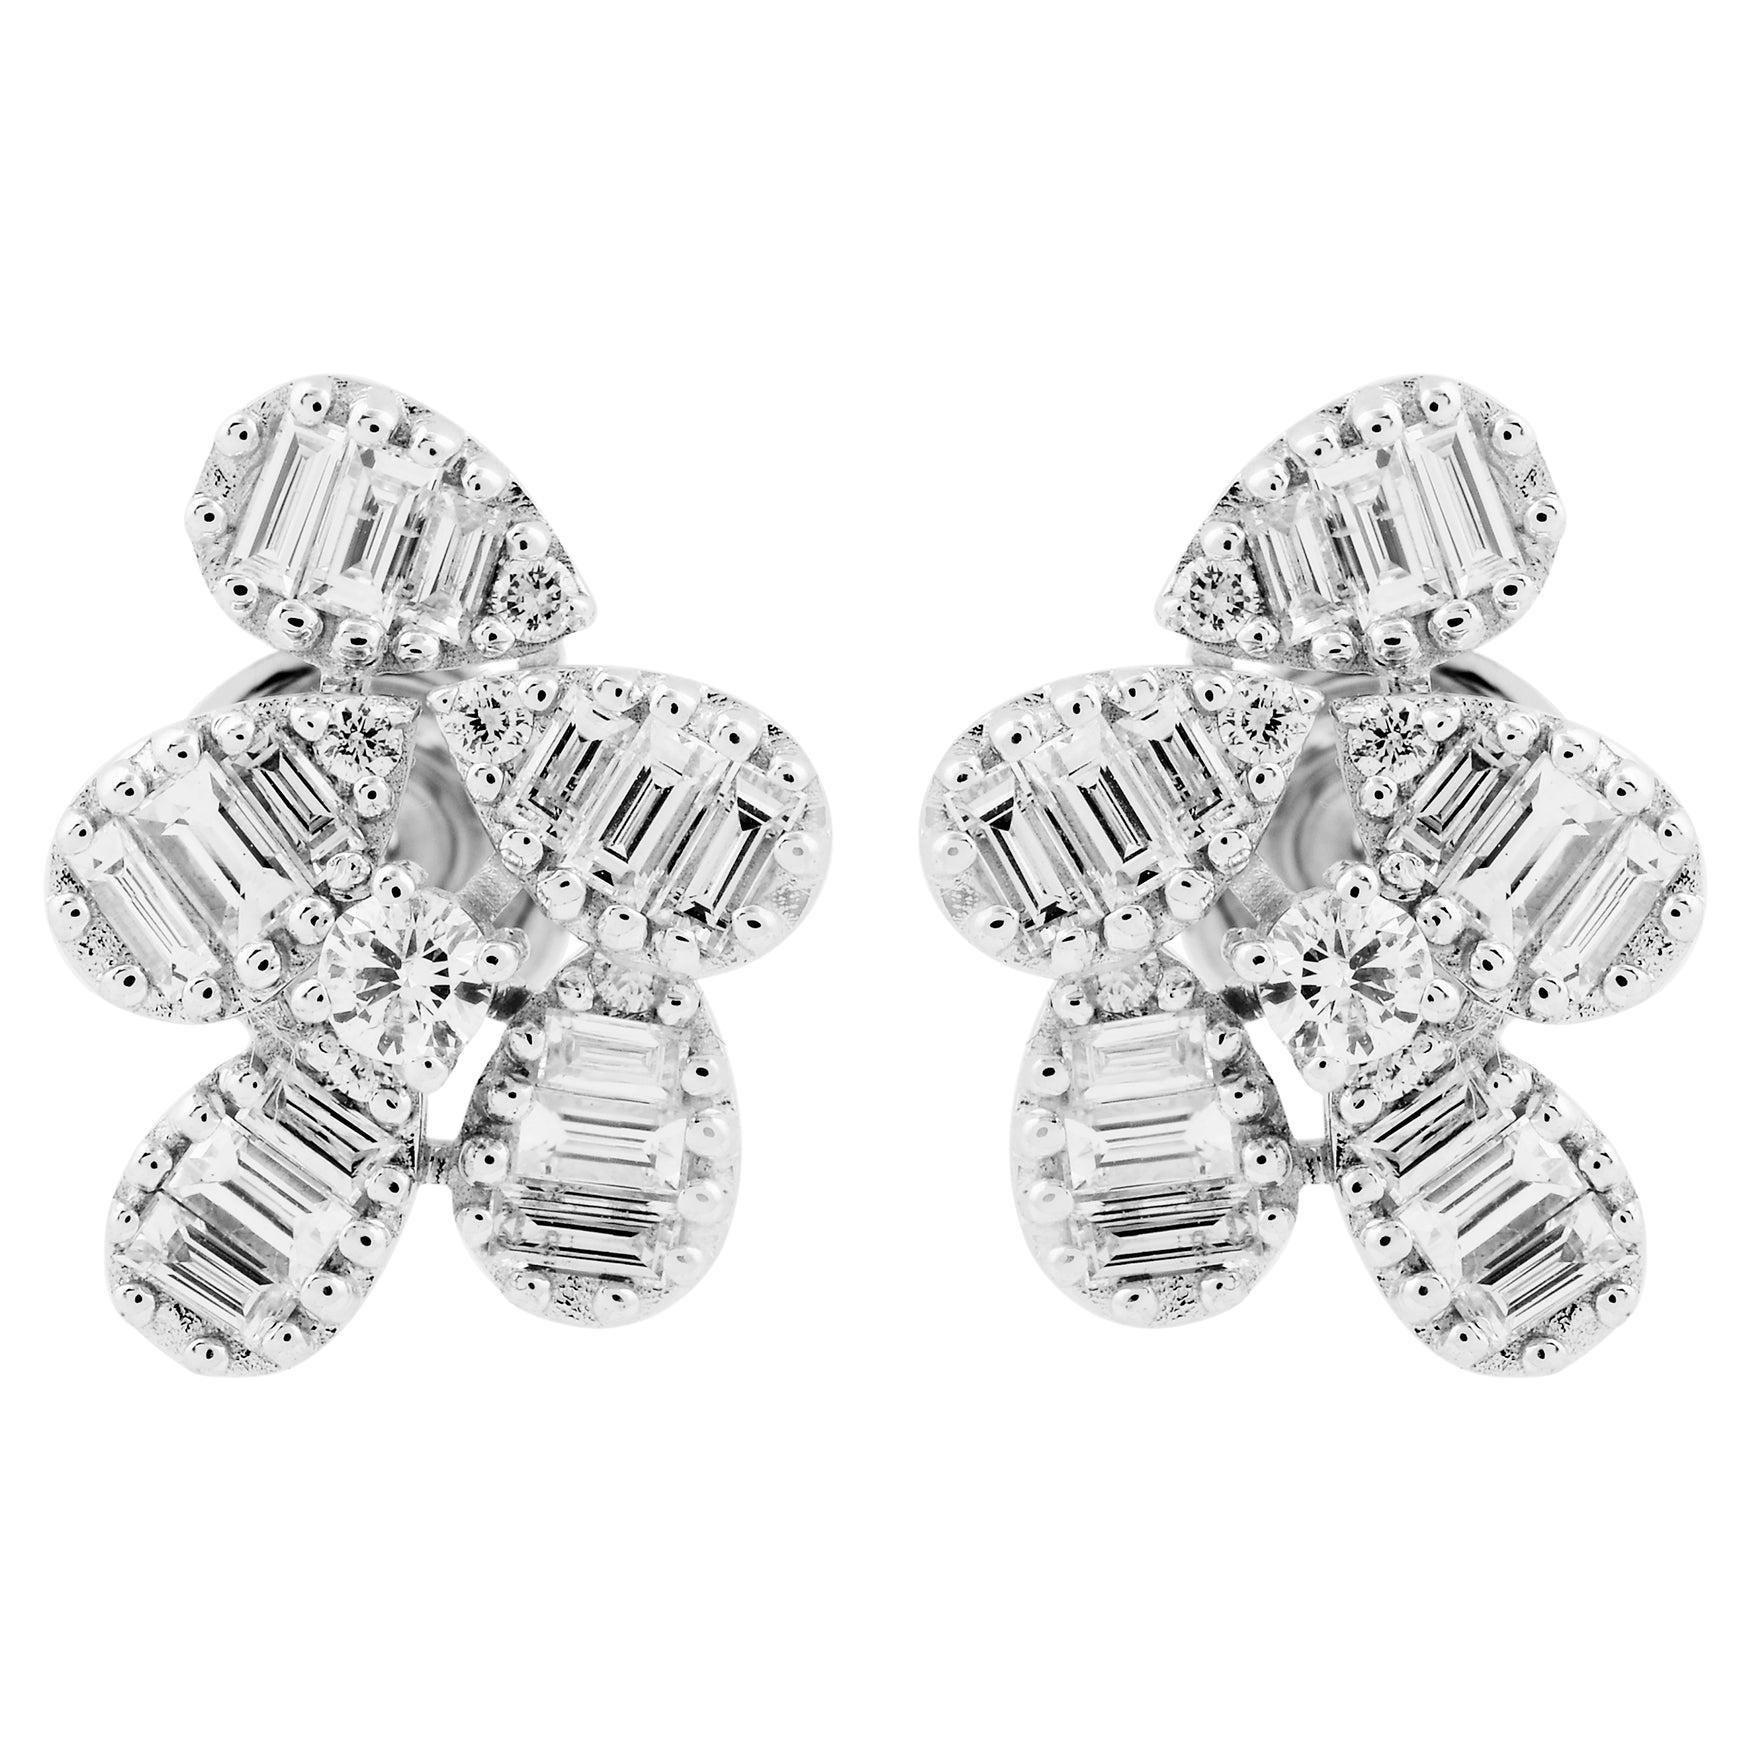 SI Clarity HI Color Baguette Diamond Stud Earrings Solid 18k White Gold Jewelry